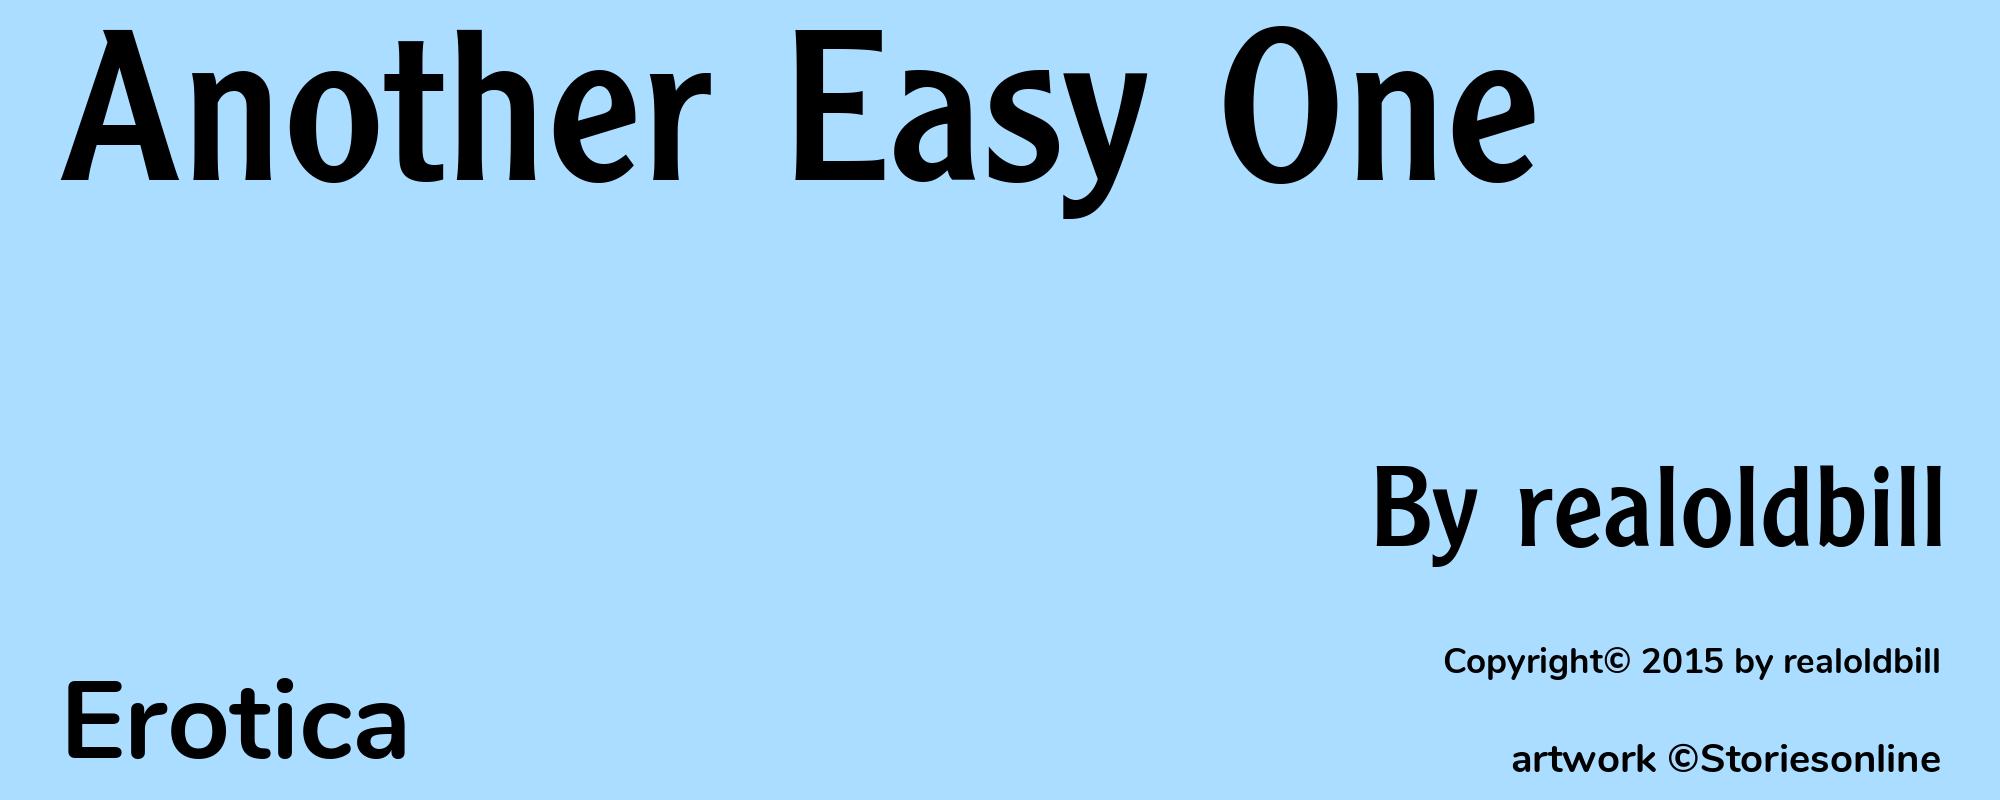 Another Easy One - Cover